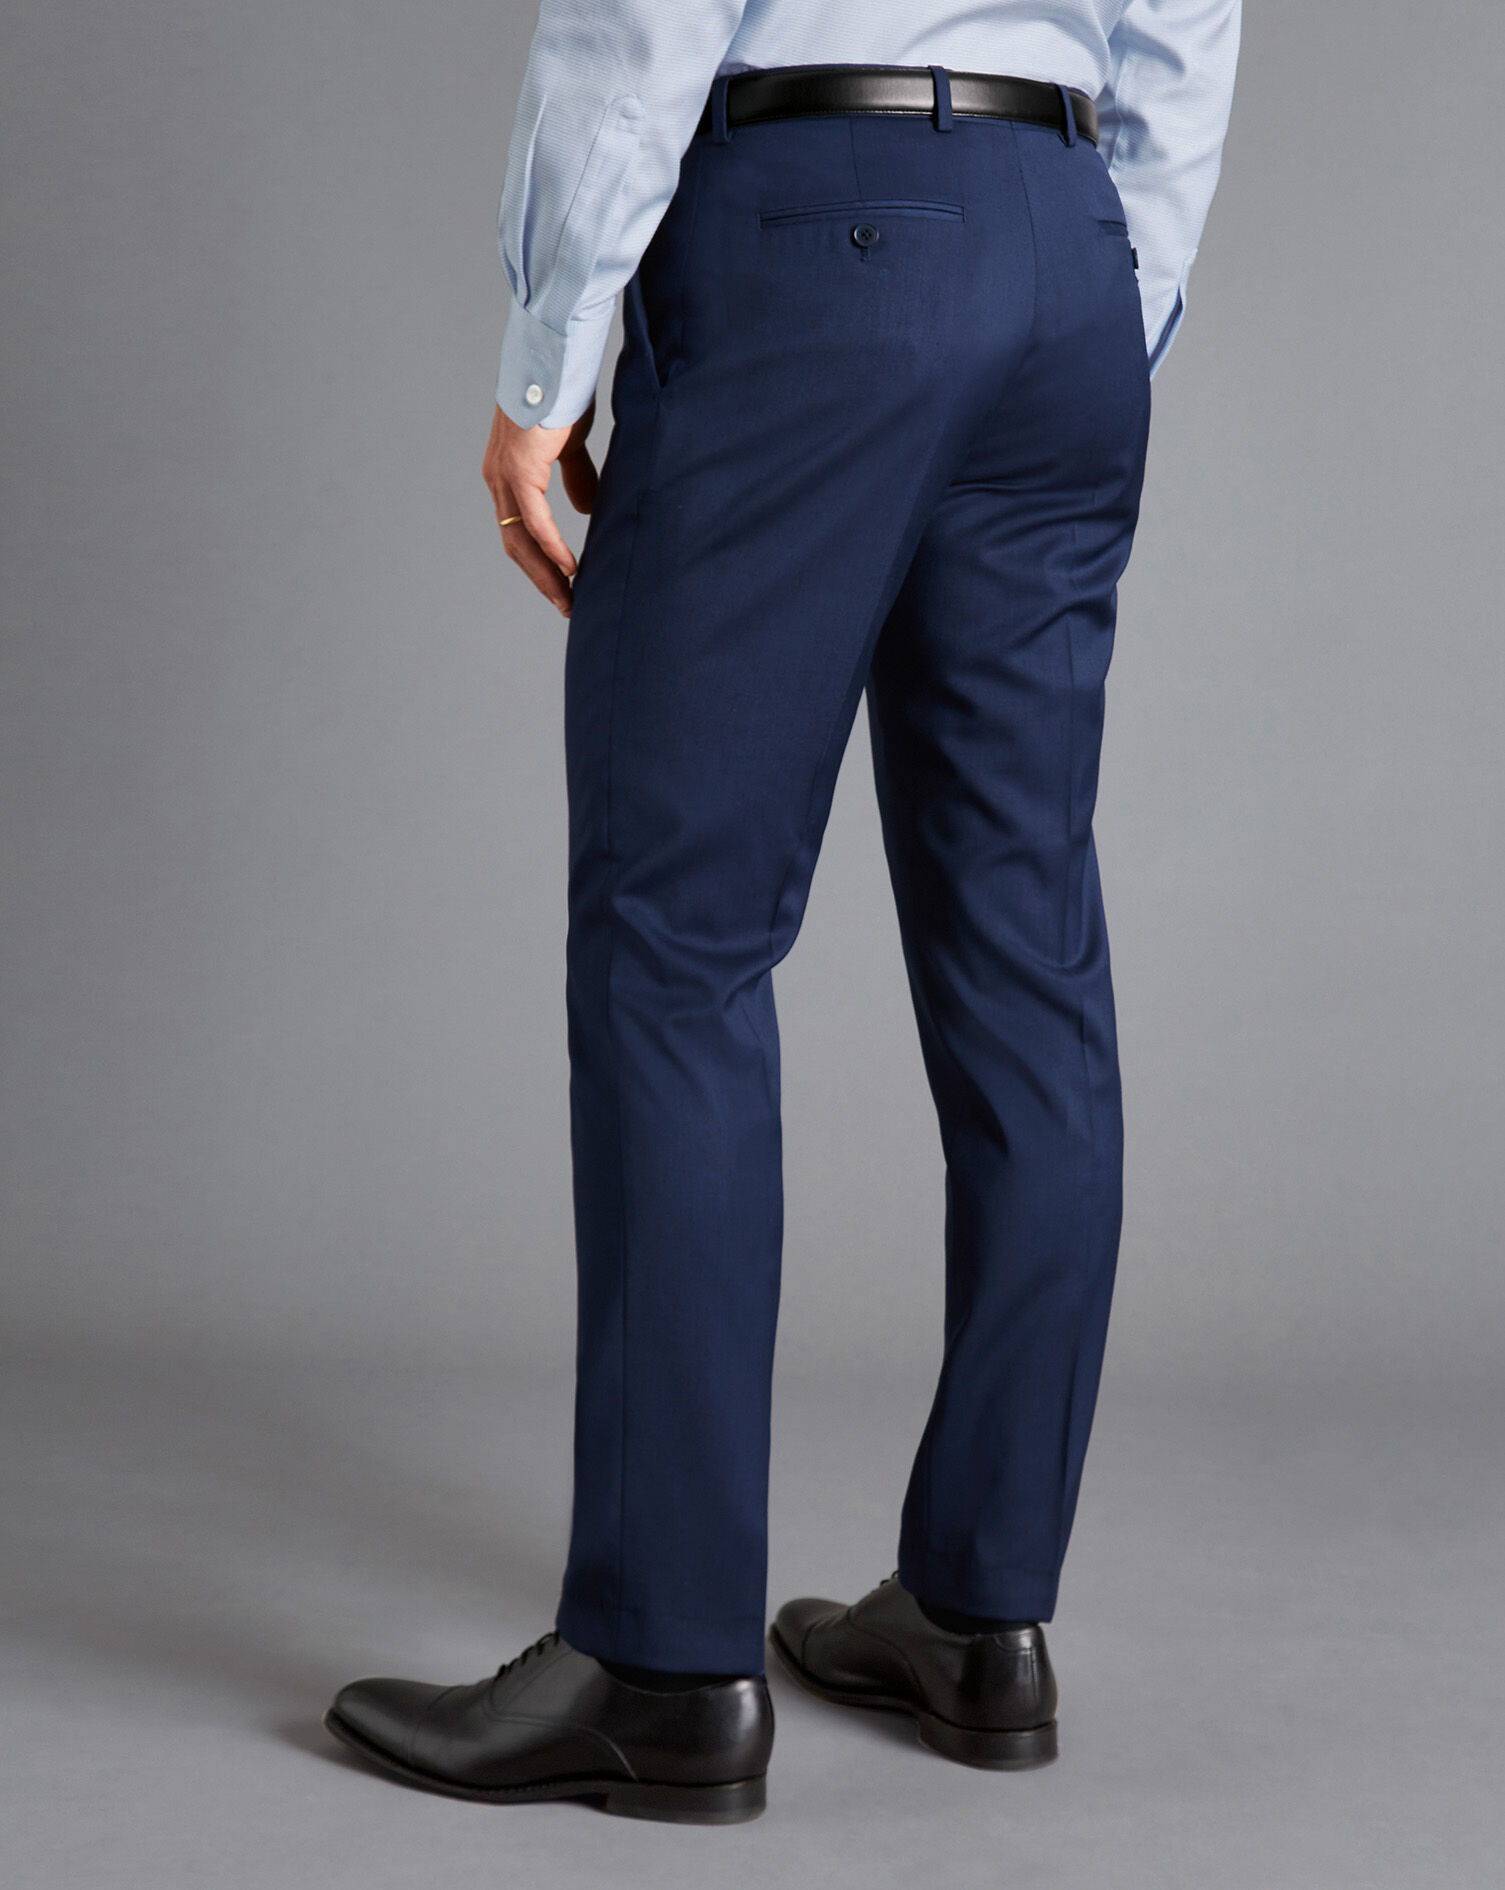 Mens Wardrobe Essential 5Pocket Twill Pants  What are Twill Pants